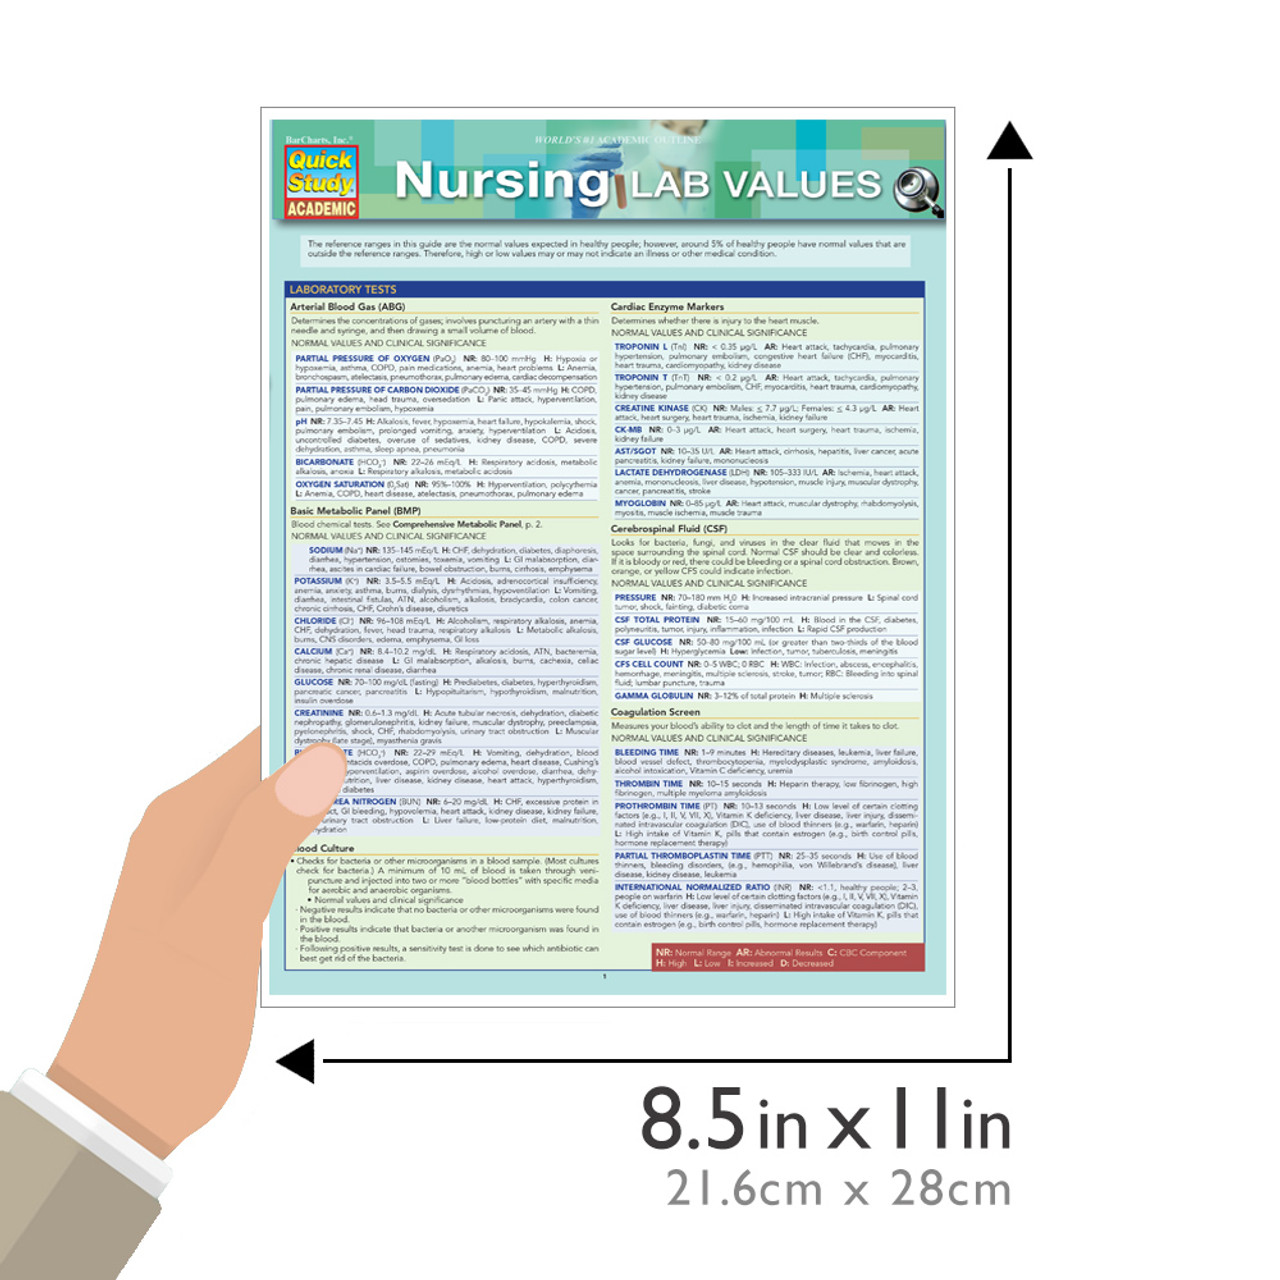 Nursing Teas 7: A Quickstudy Laminated Reference Guide (Other)